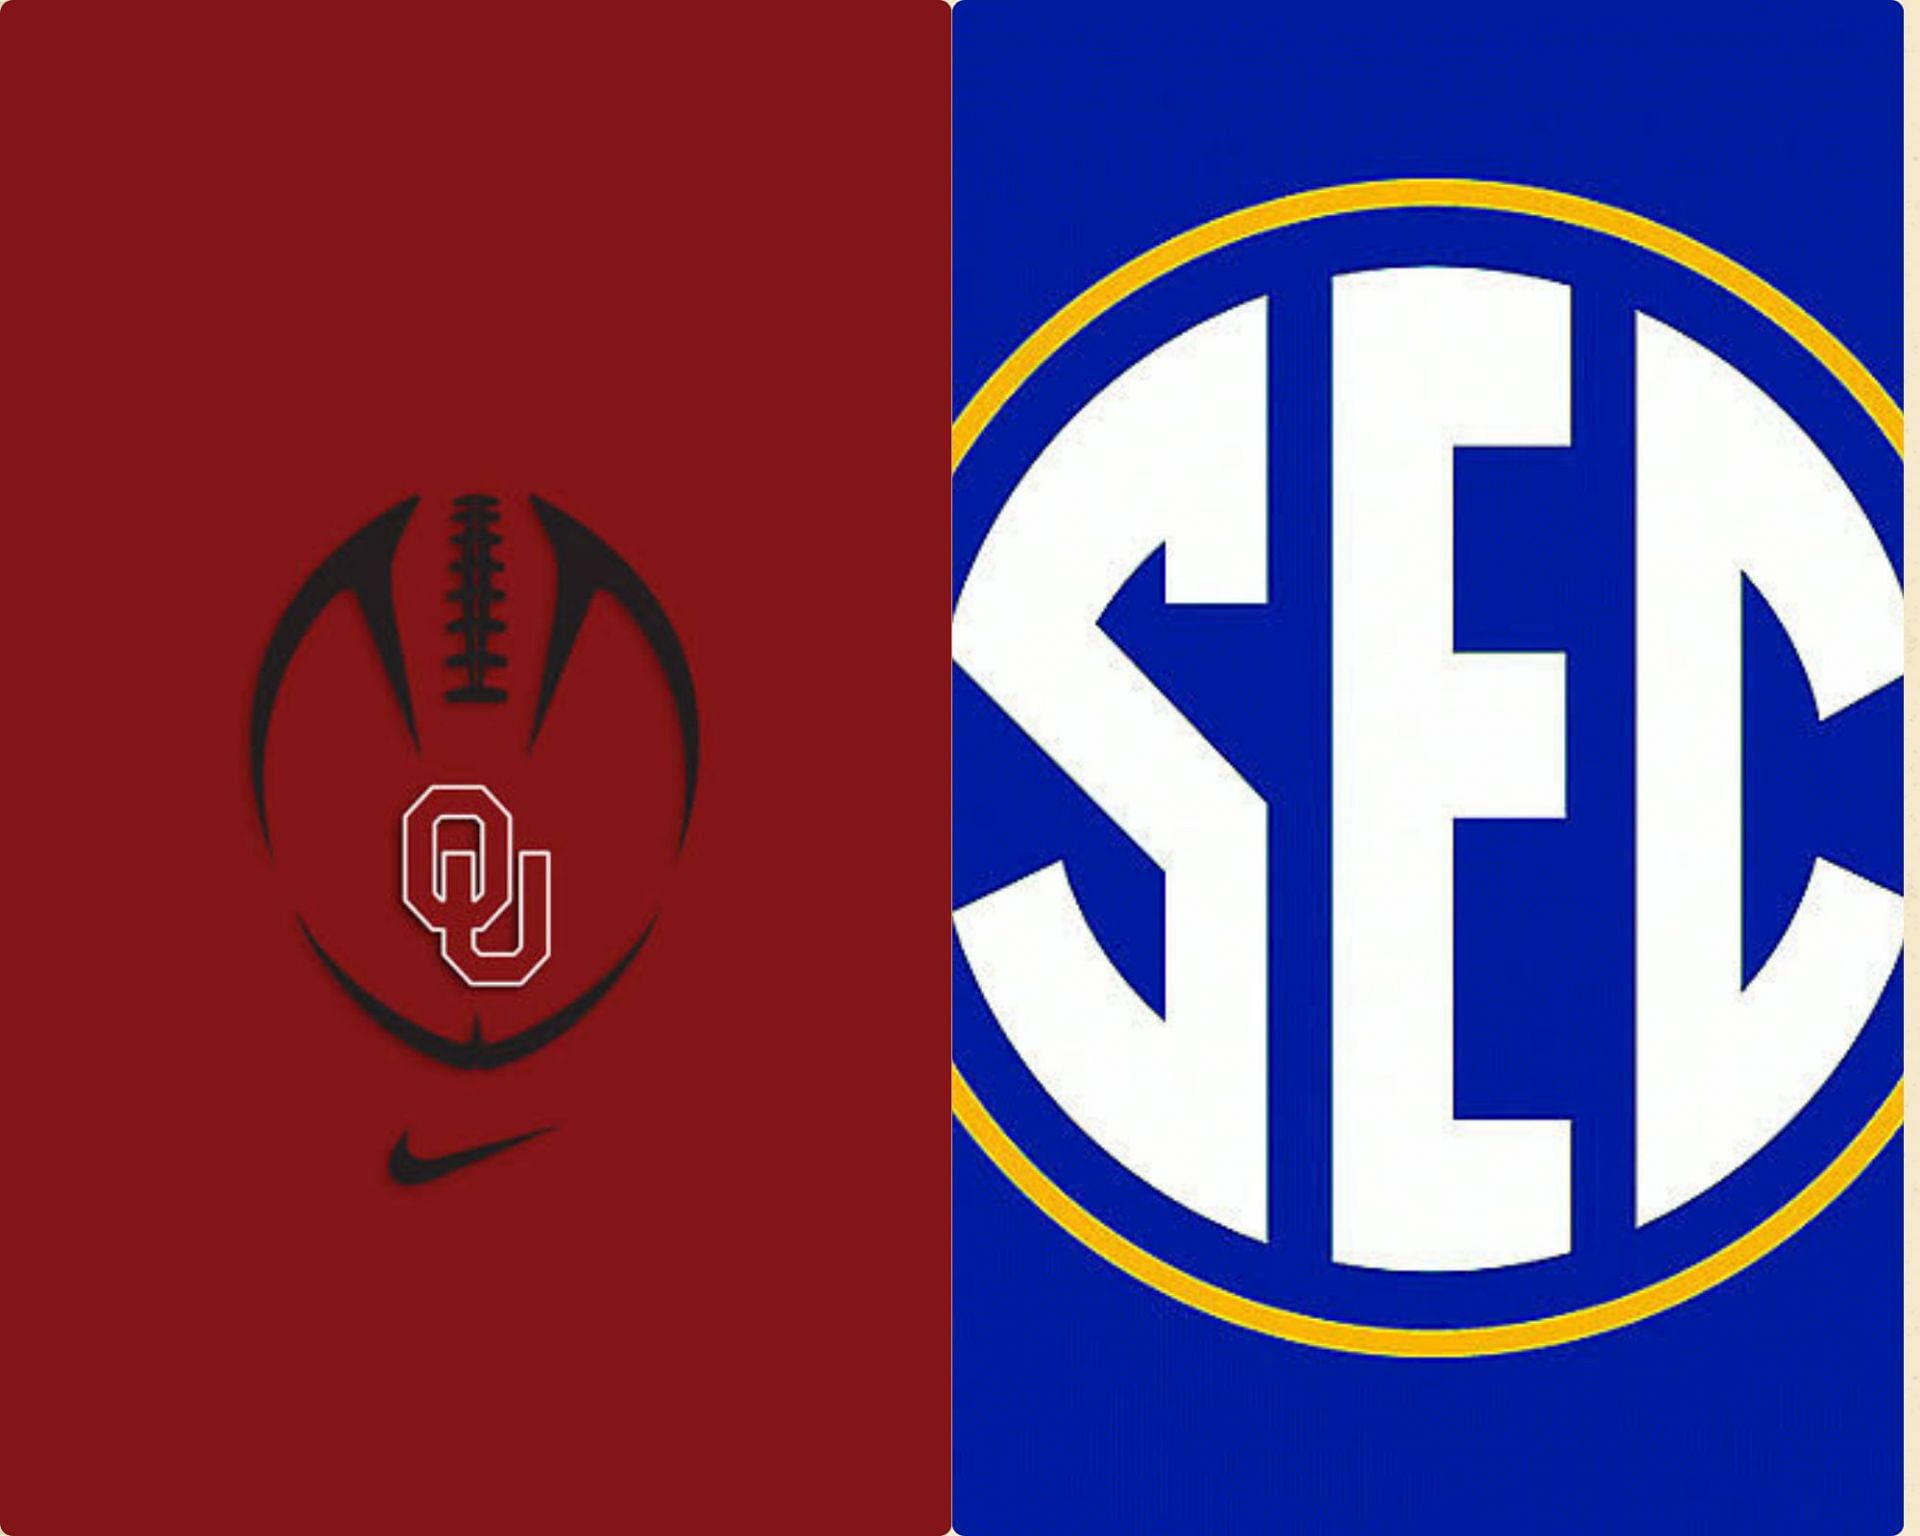 Oklahoma is on its way to the SEC